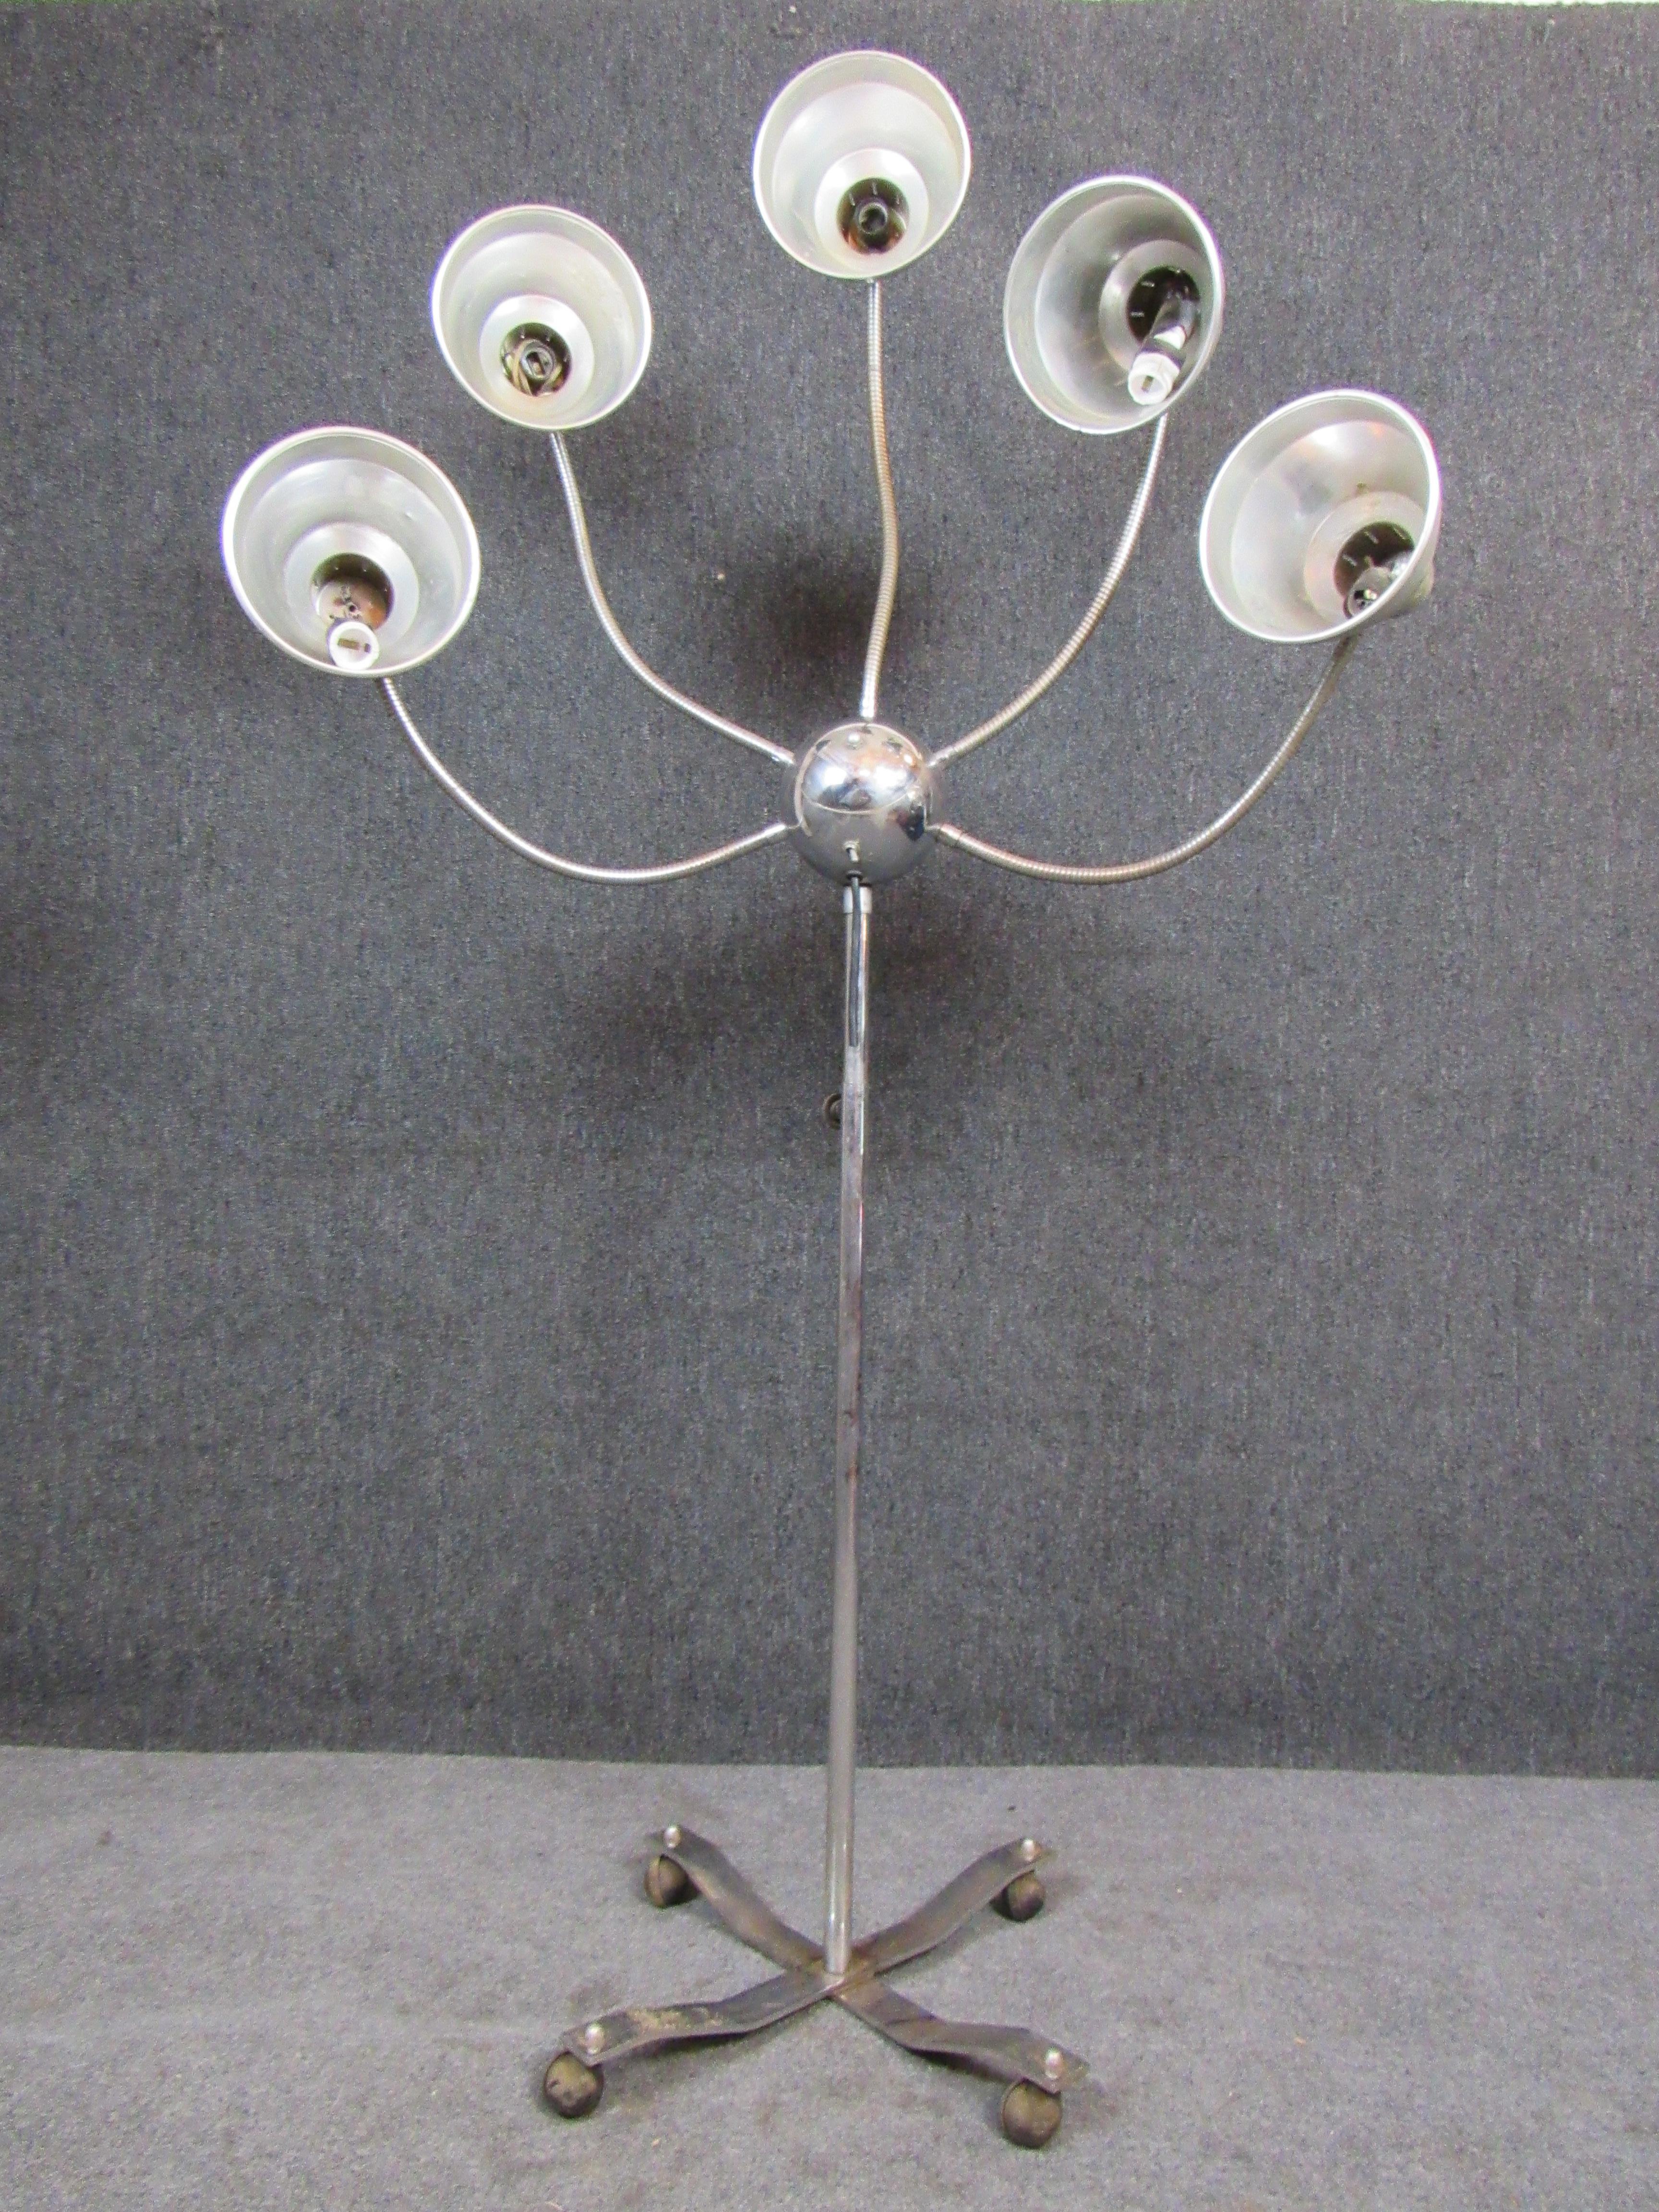 Bring home a floor lamp that is truly out of this world! Sporting five individual lamp shades, each affixed to their own tentacle-like articulated gooseneck sprouting from a chrome central globe, this floor lamp is almost fully alien in appearance!